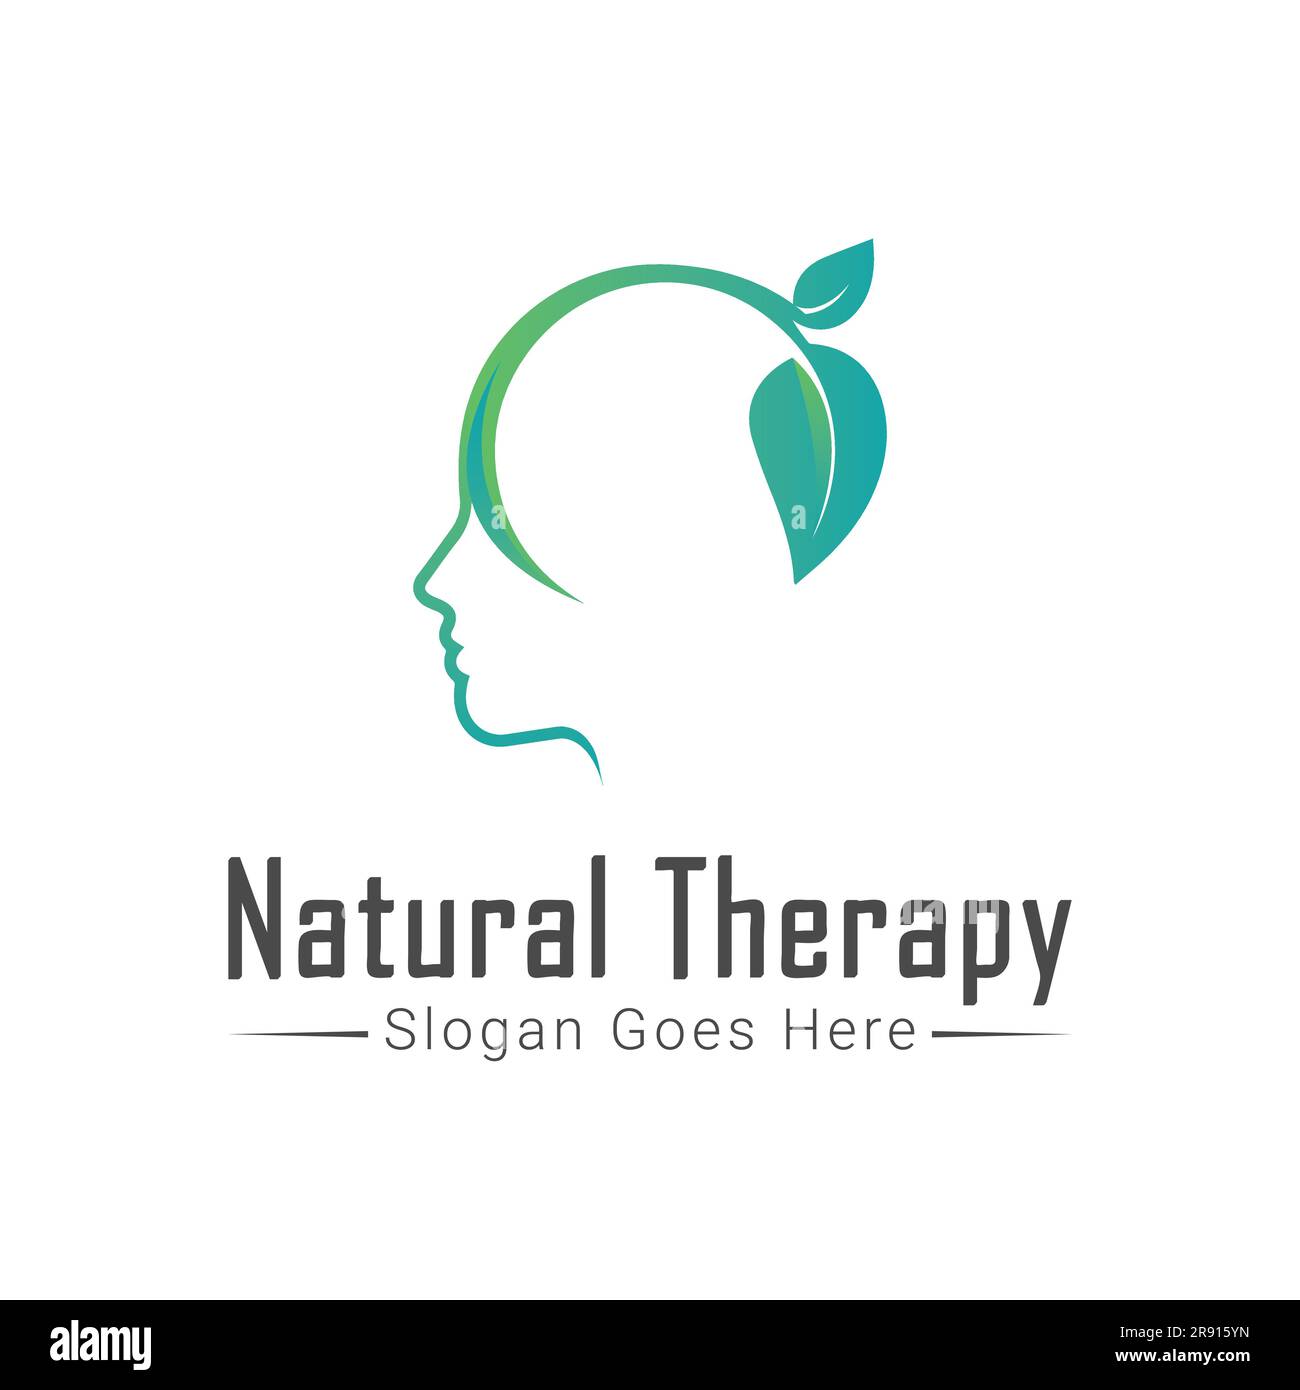 Natural Therapy Logo Design Psychotherapy Logotype Wellness Relaxation Stock Vector